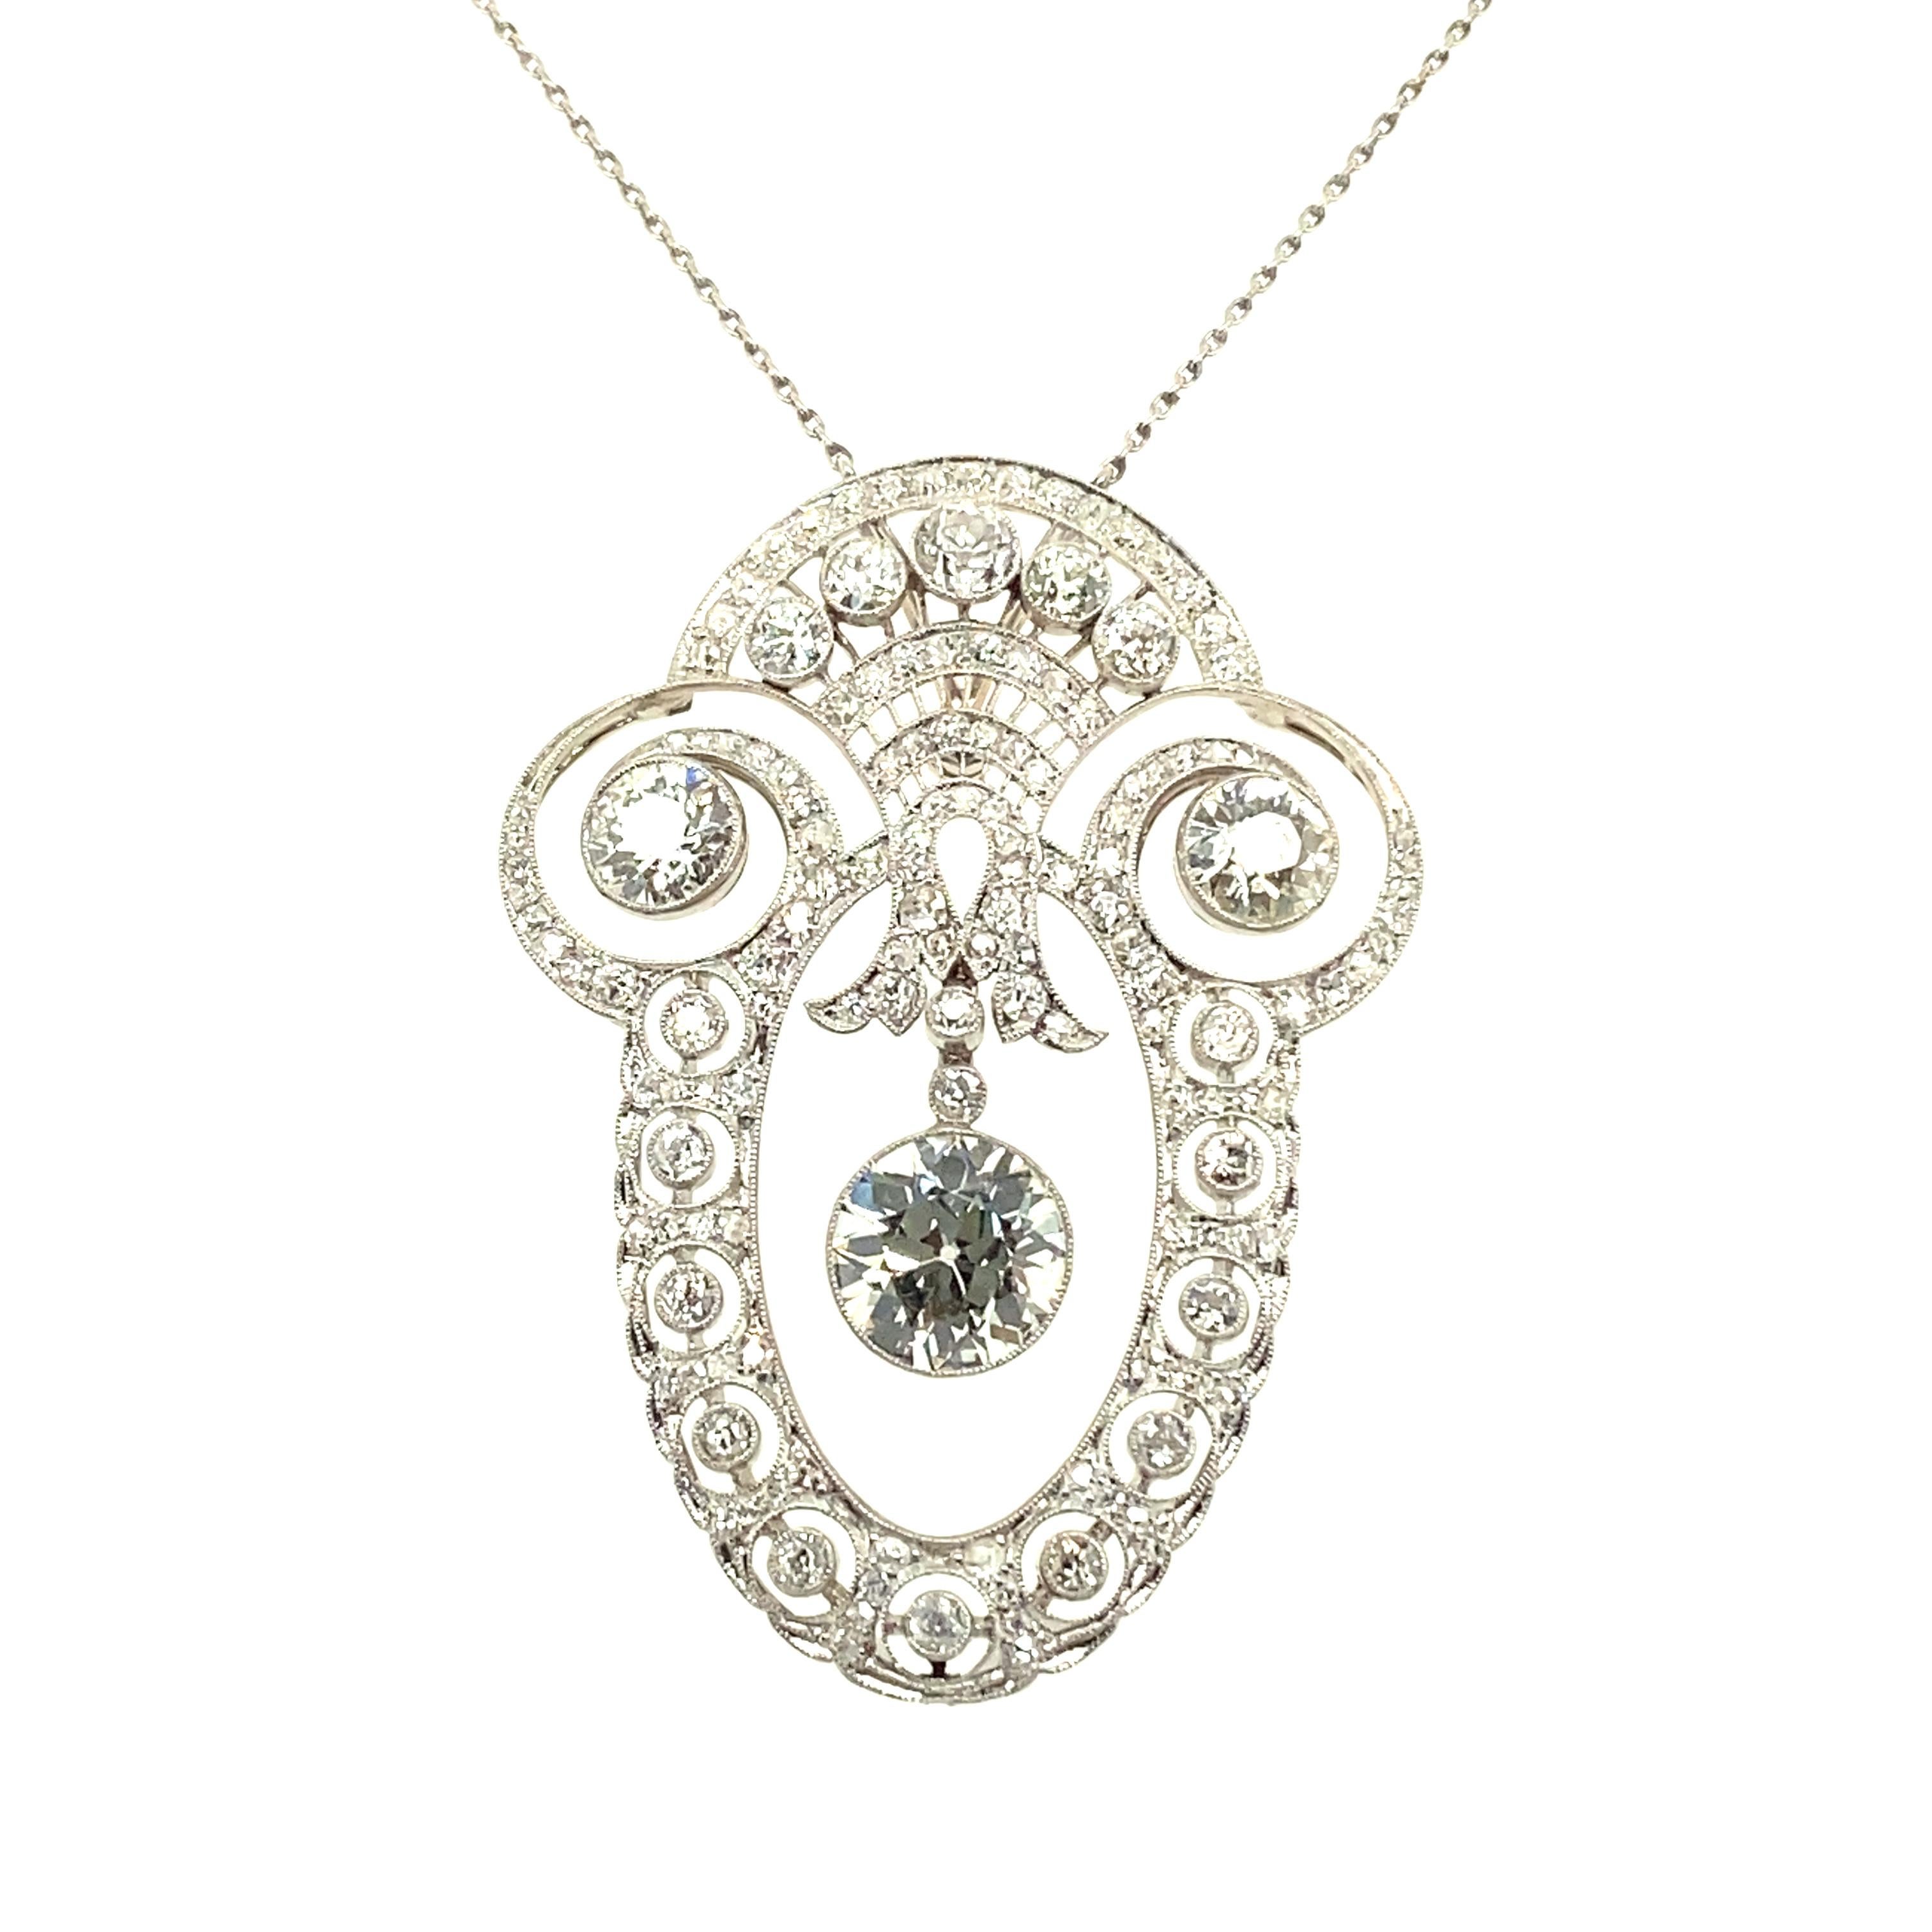 This stunning diamond necklace from the early 20th century Edwardian era is delicately handcrafted in platinum 950.
Technical advances at this time made it possible to process platinum for jewellery purposes, and so diamonds were set in the very